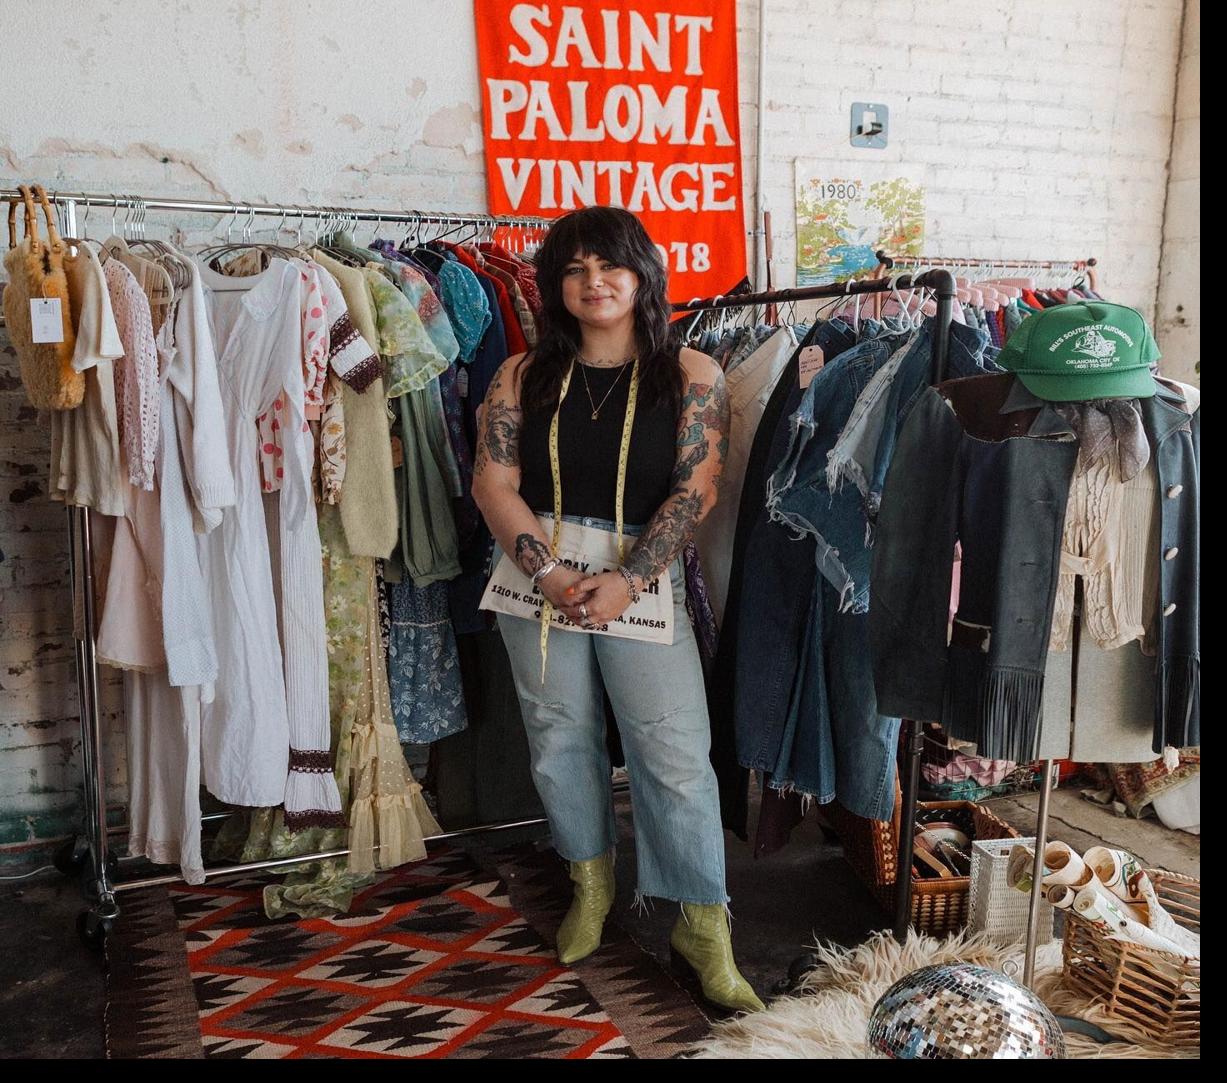 OK Vintage Market curates collection of vendors, products, Culture